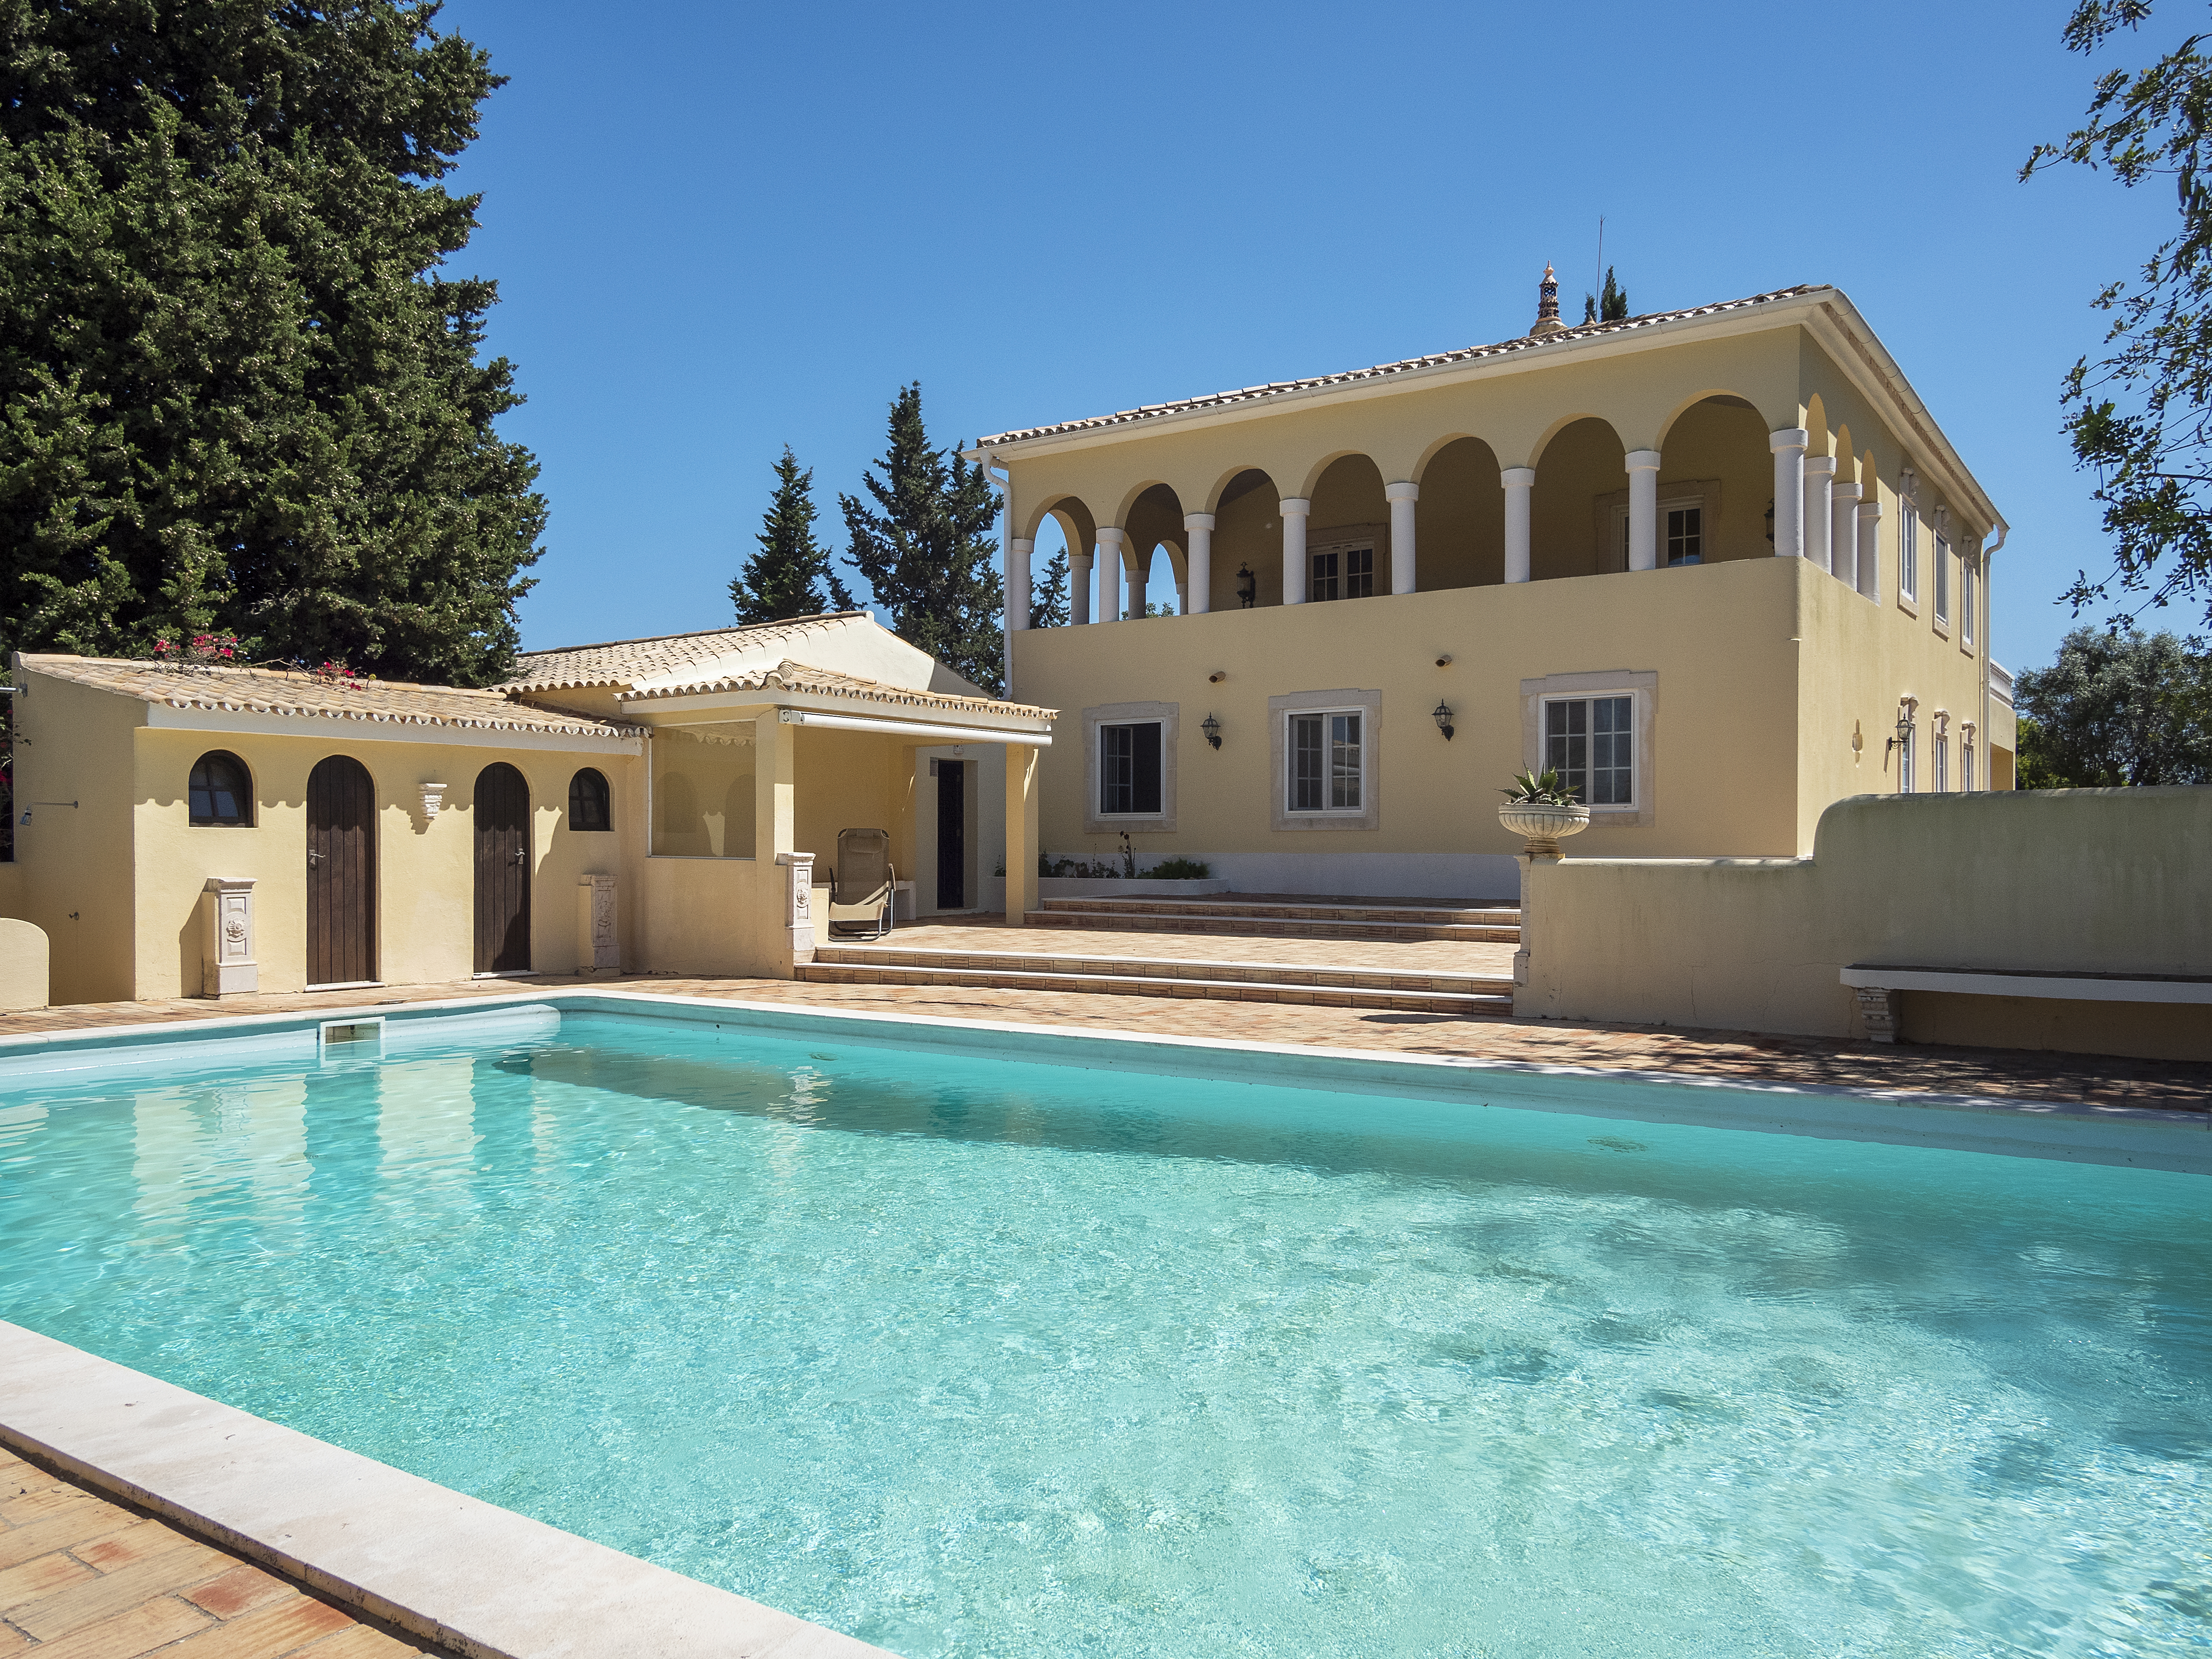 grand luxury yellow villa in Portugal with pillars and swimming pool